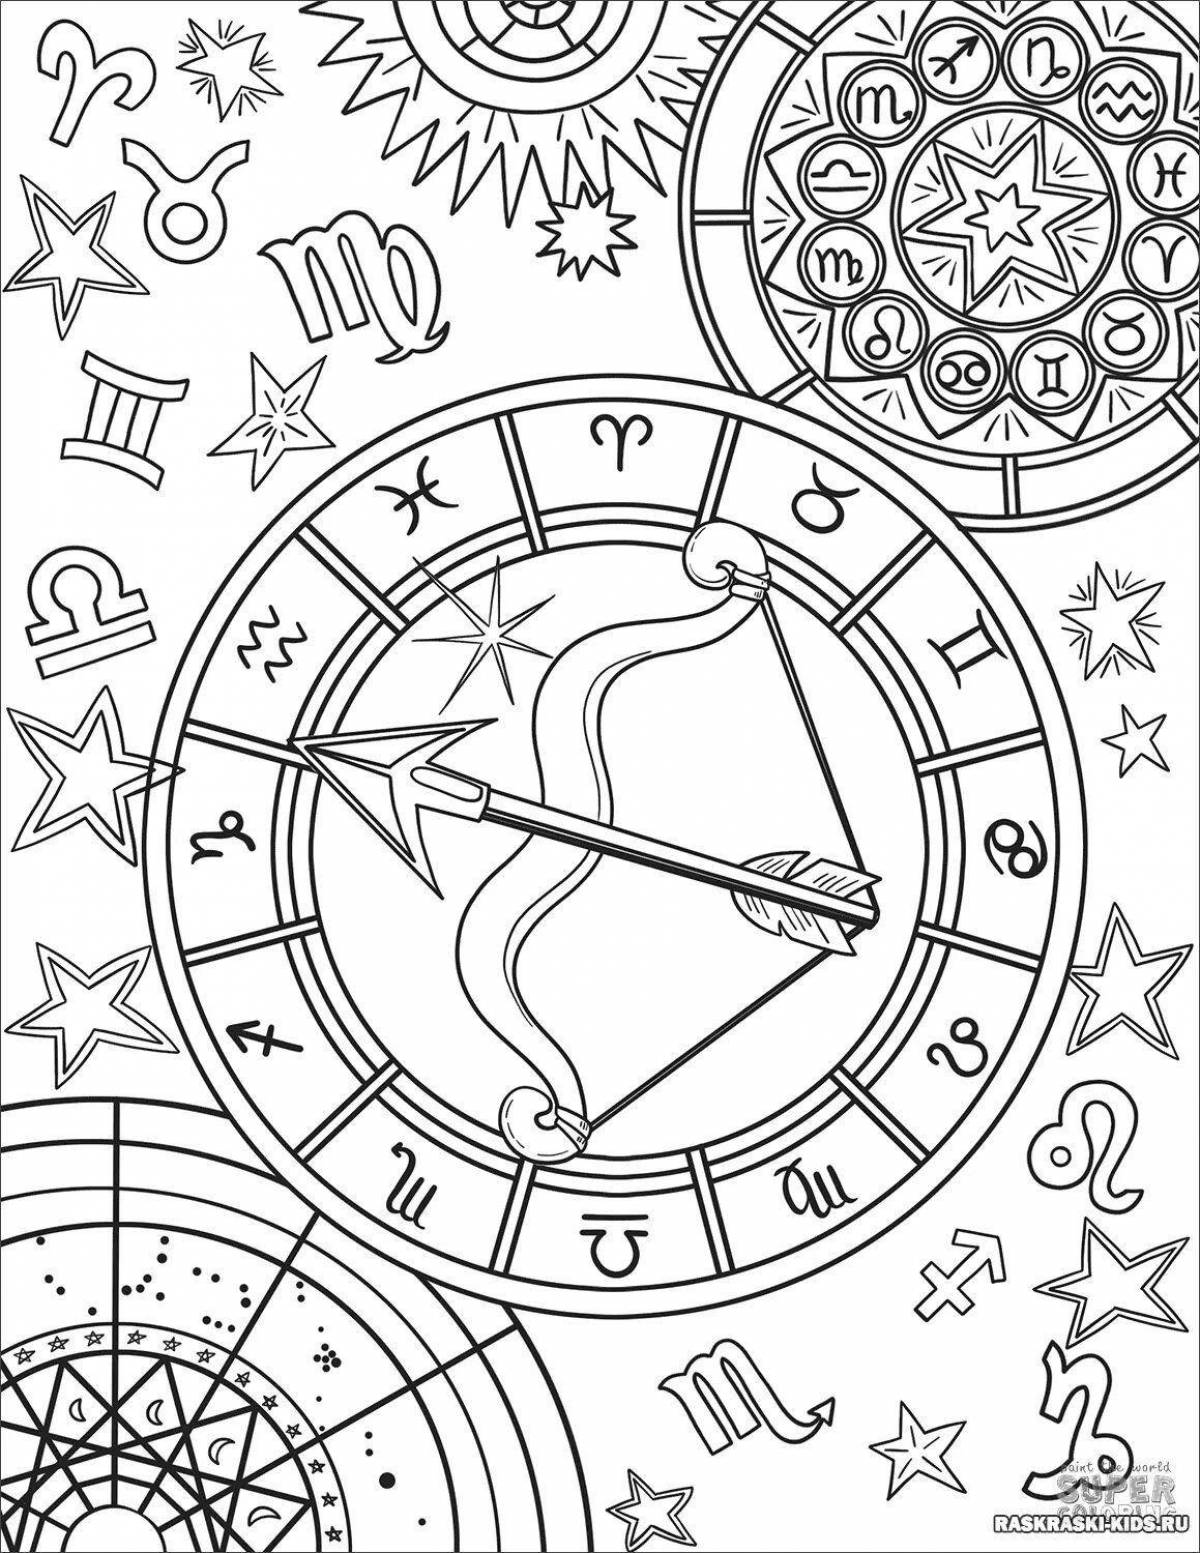 Colorful zodiac signs coloring pages for kids to stimulate the mind